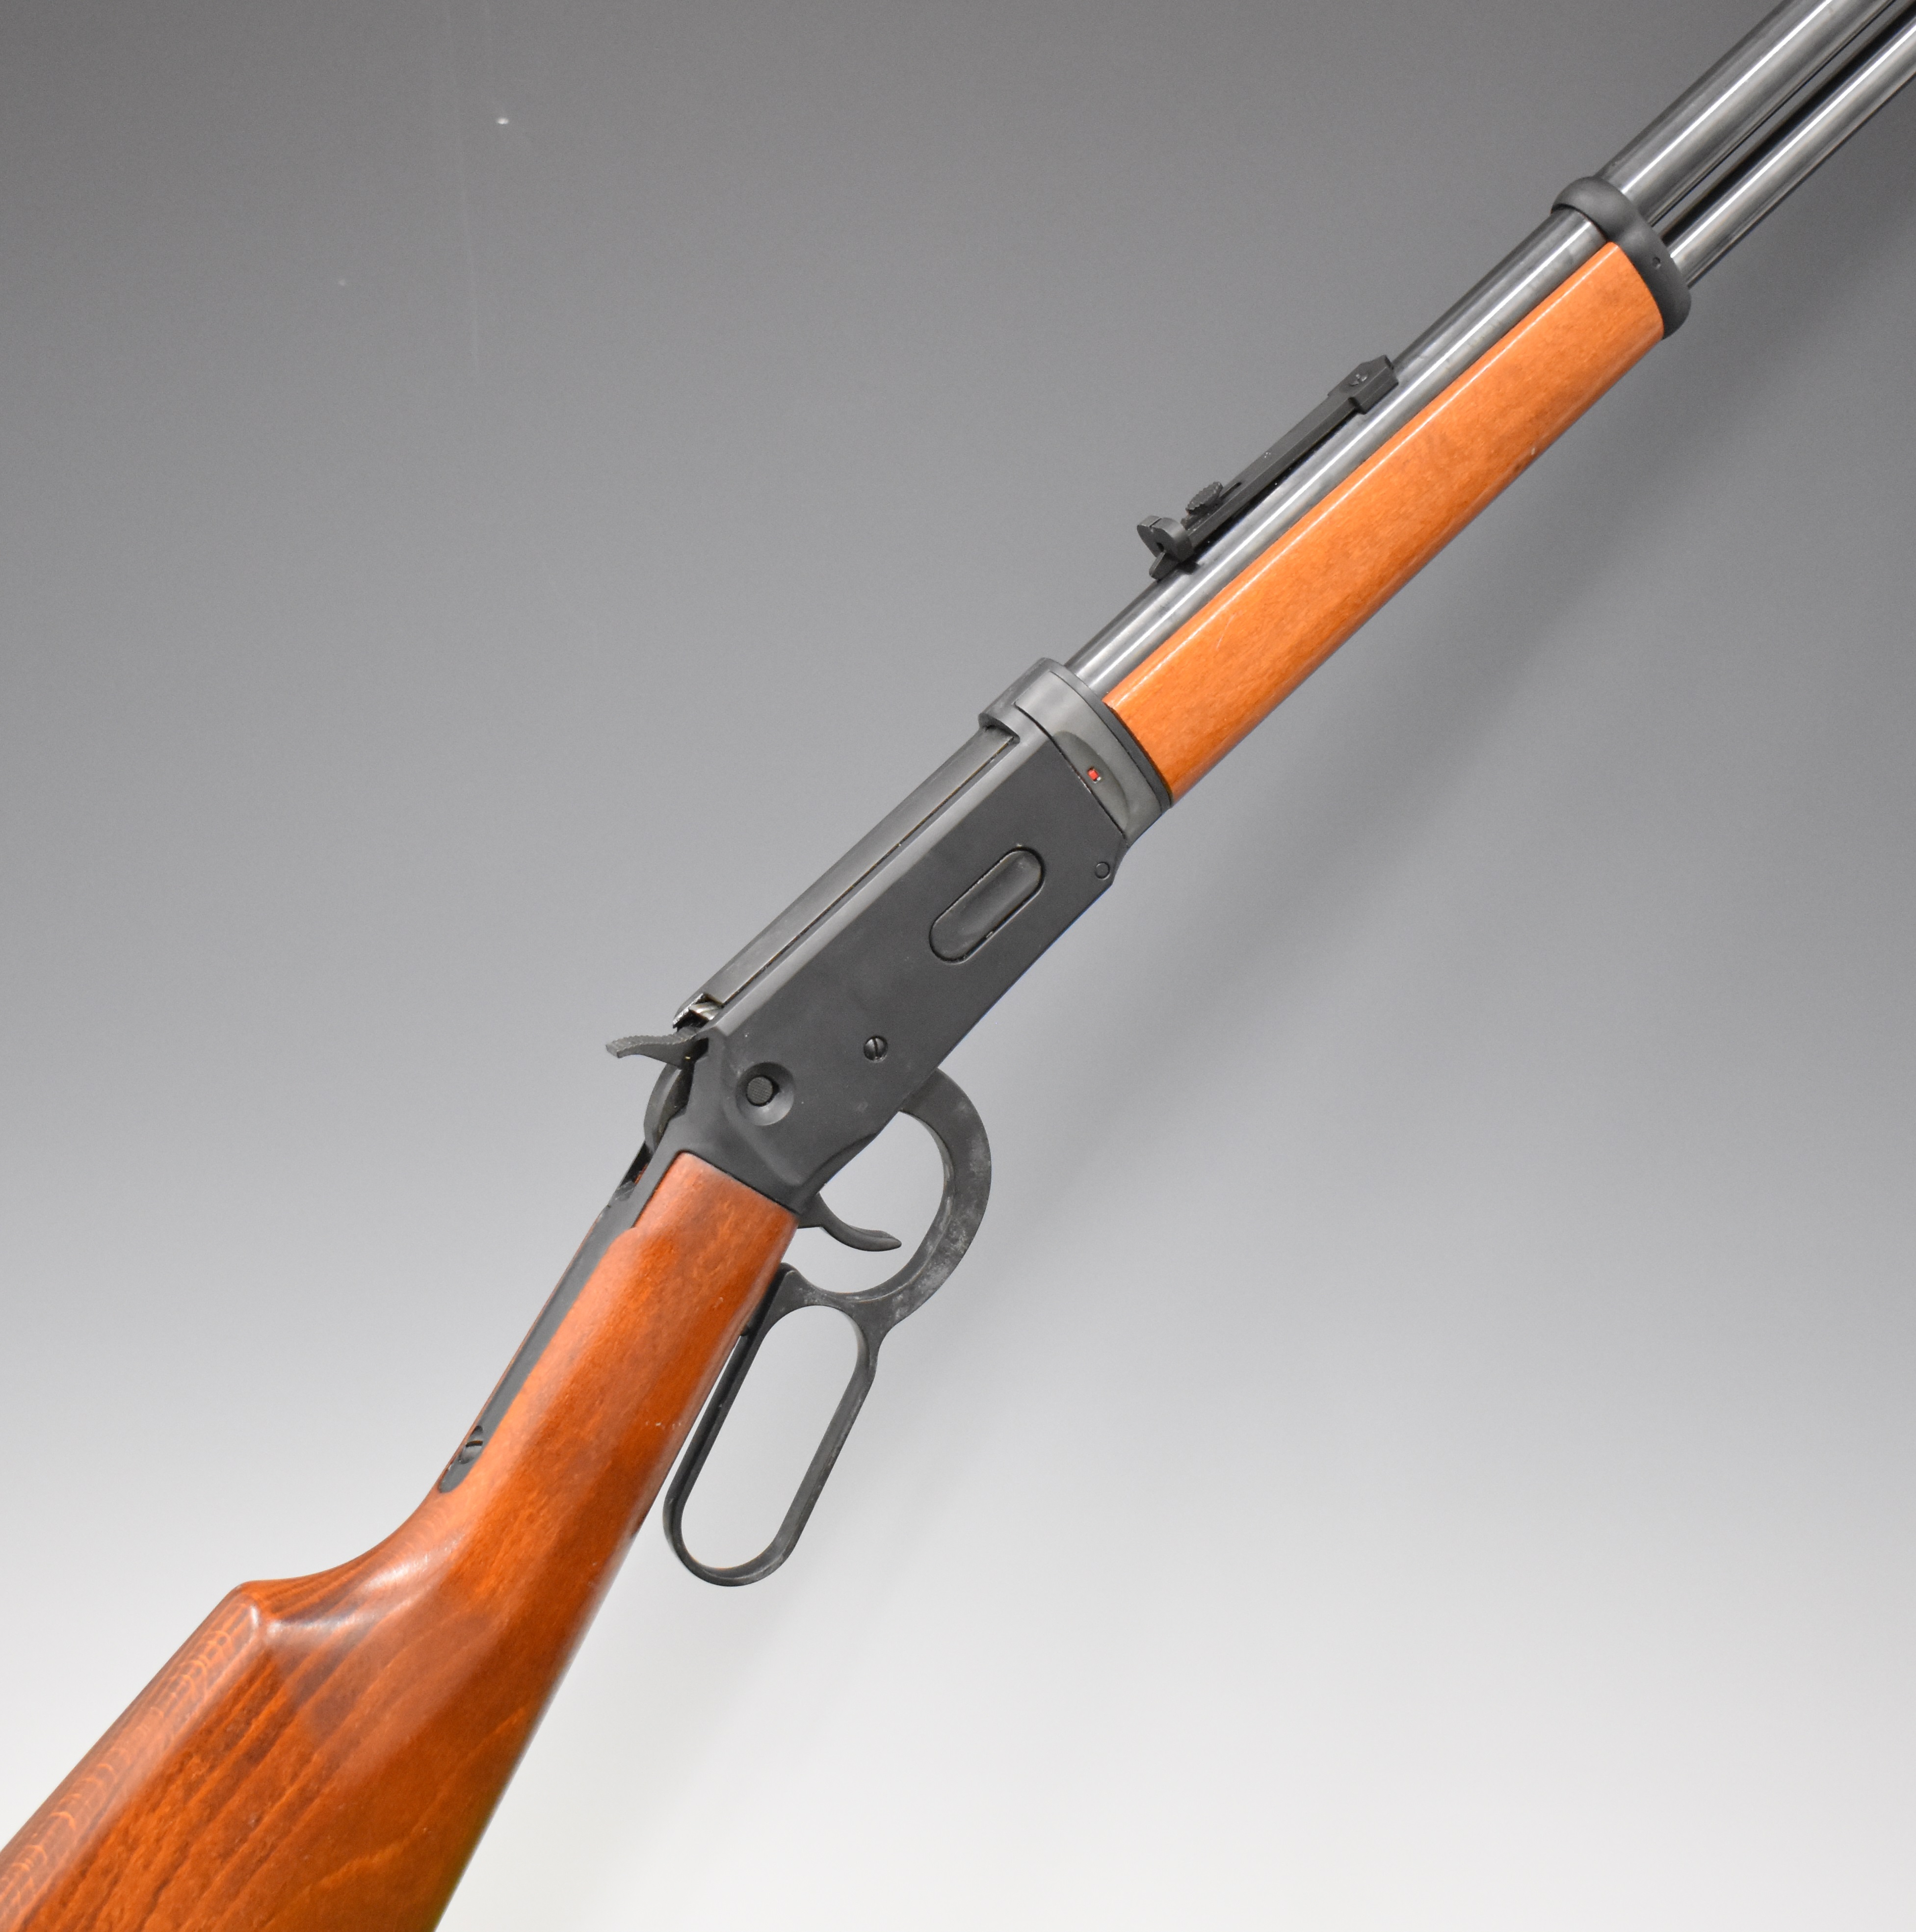 Walther Winchester style lever-action .177 CO2 carbine air rifle with two 8 shot magazines,